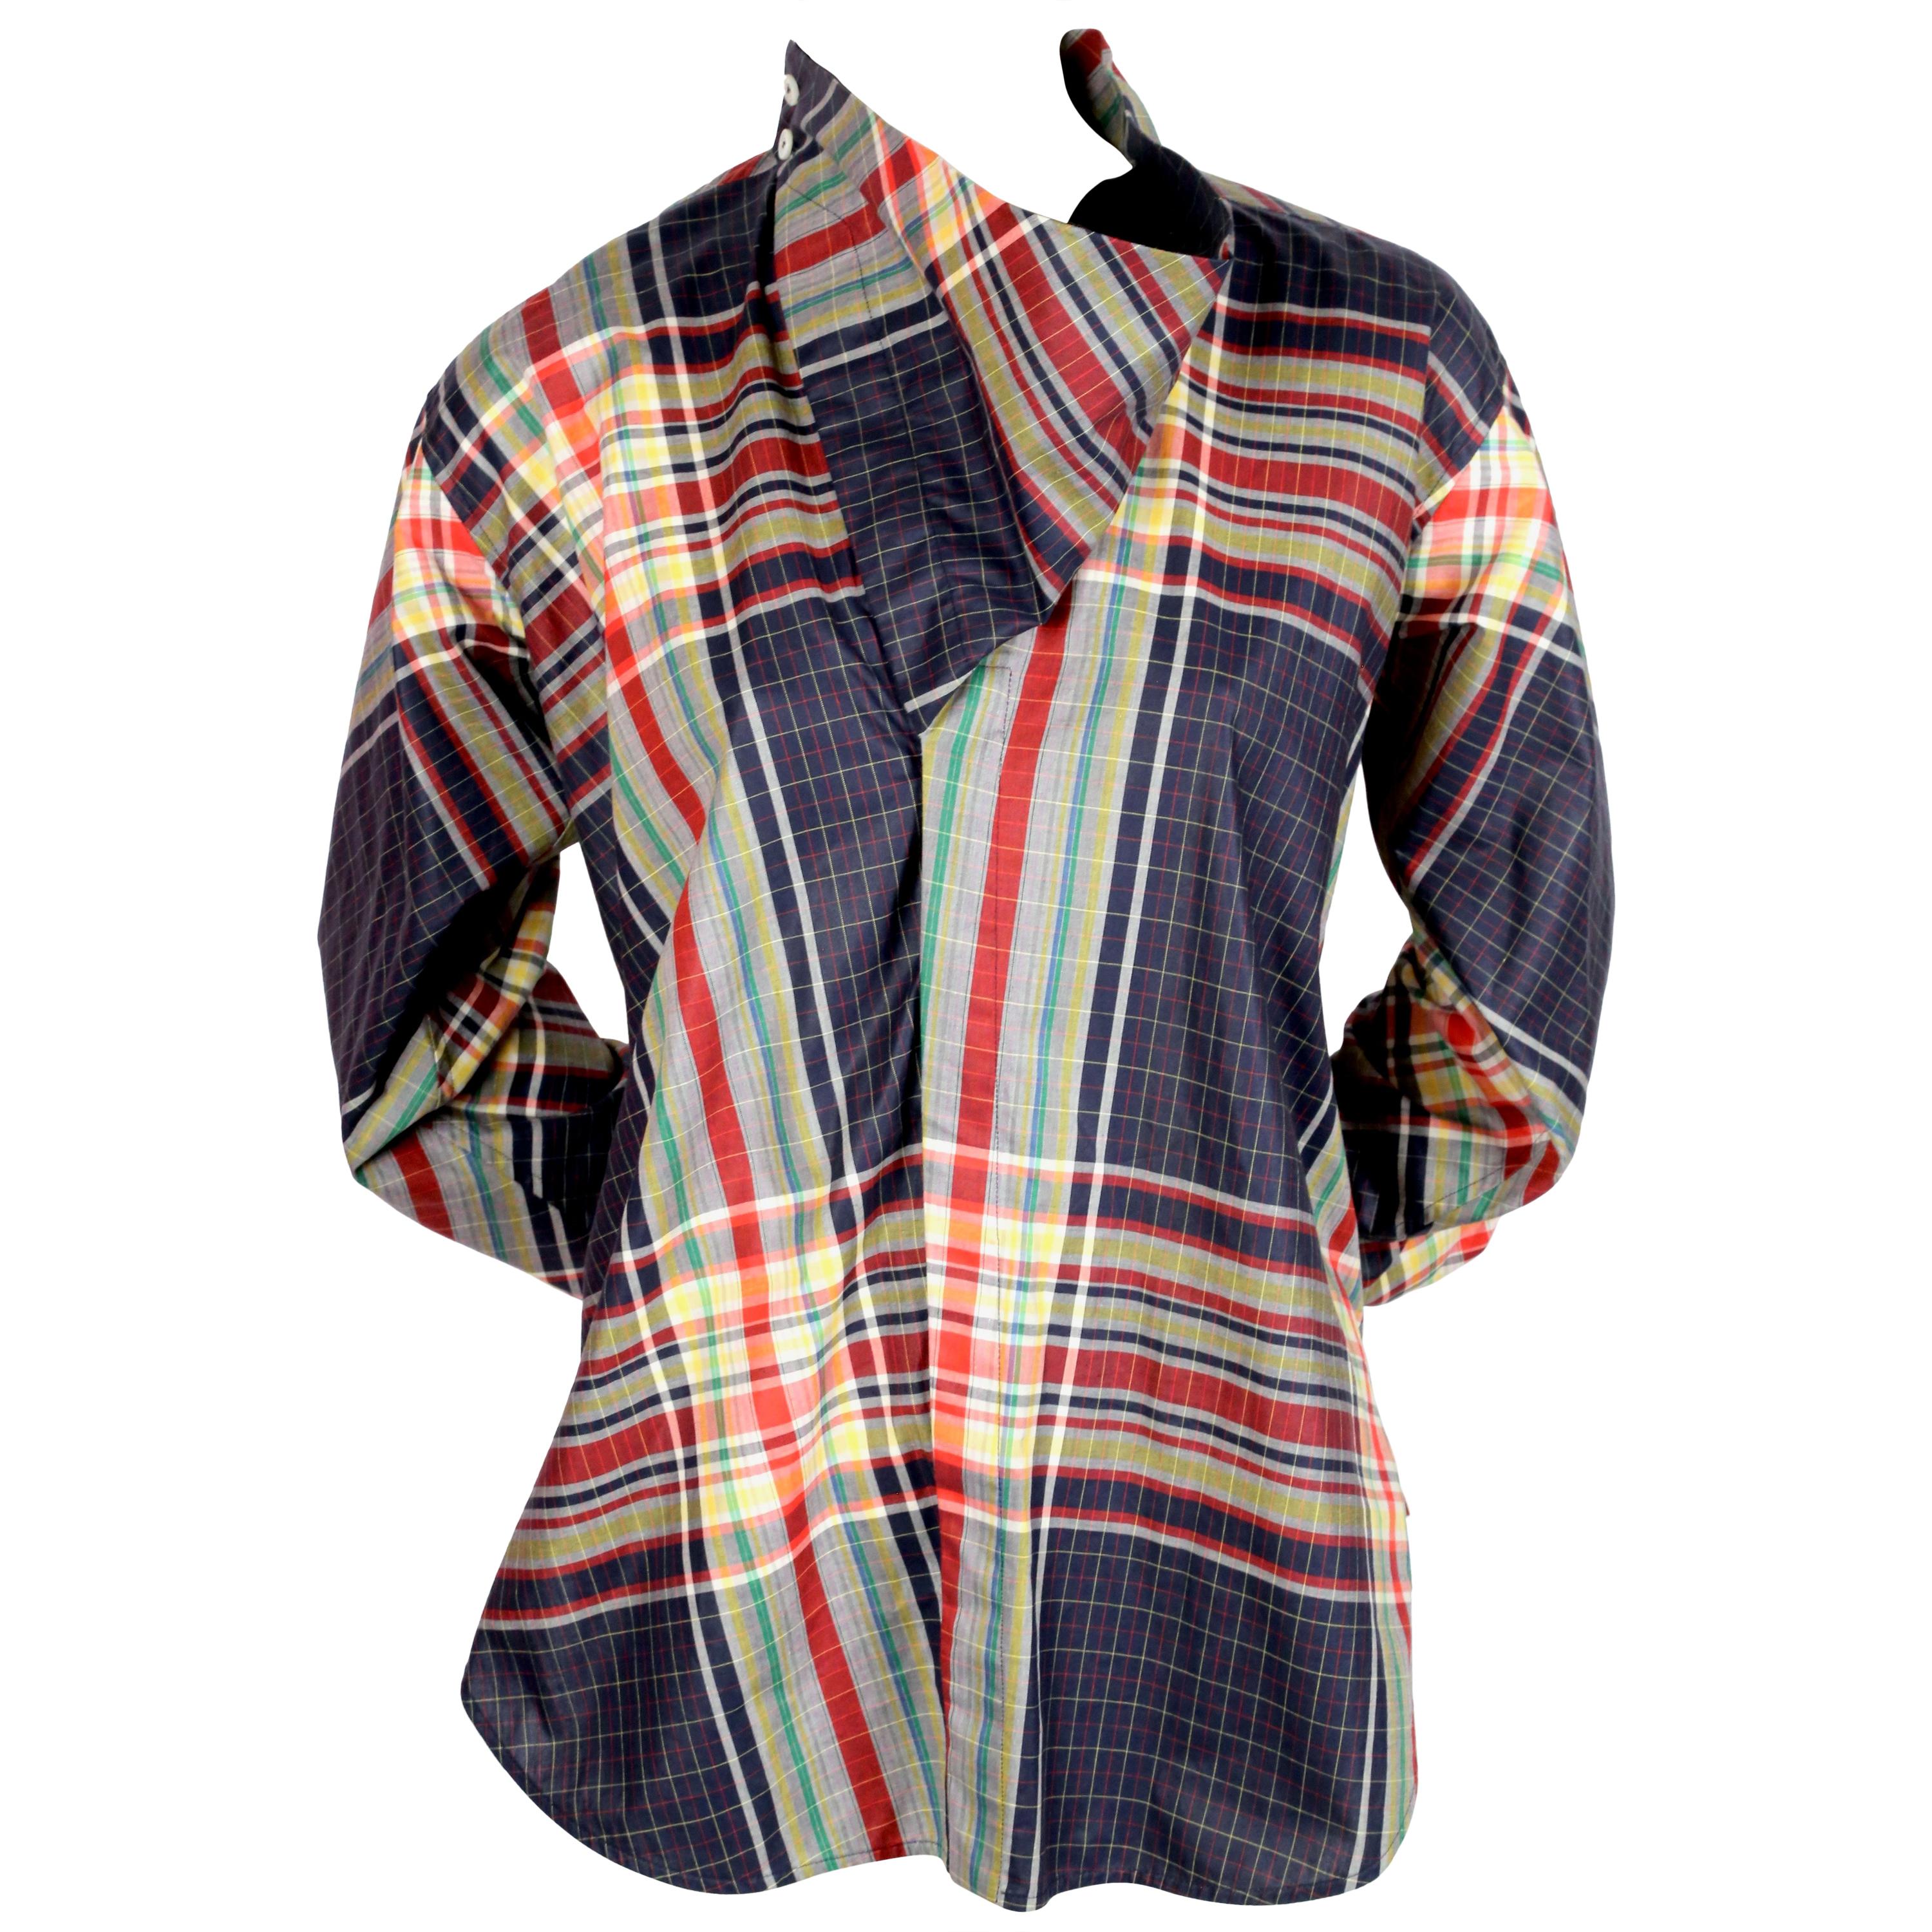 2013 CELINE by PHOEBE PHILO plaid cotton runway shirt with draped neckline - new